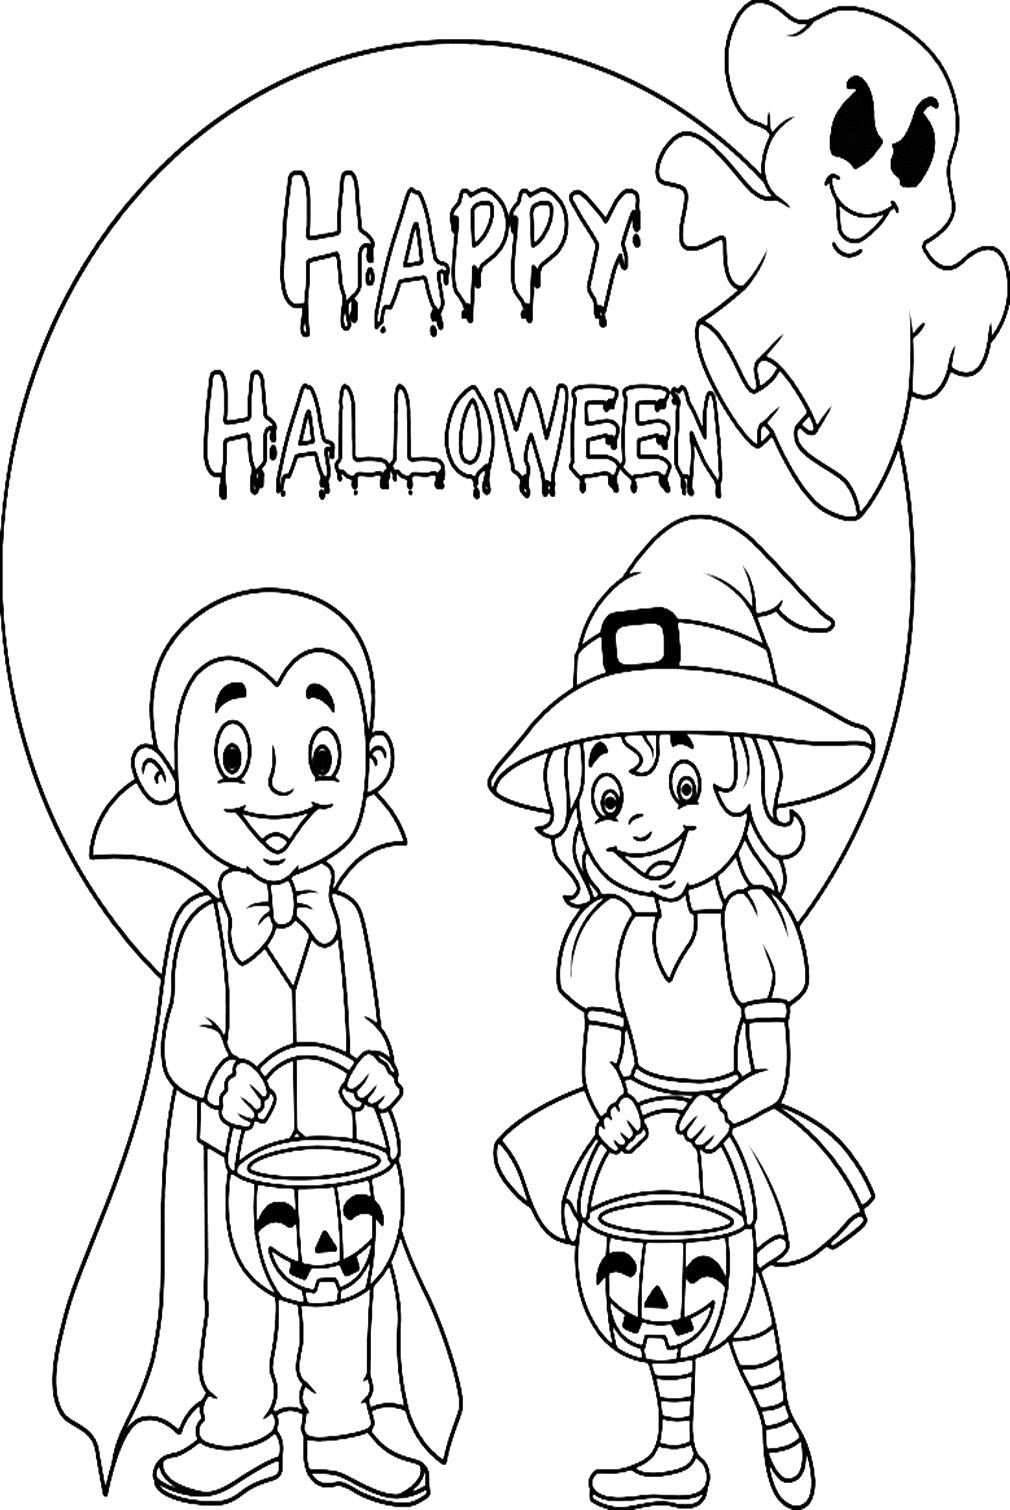 Halloween Coloring Pages Trick Or Treat from Trick or Treat